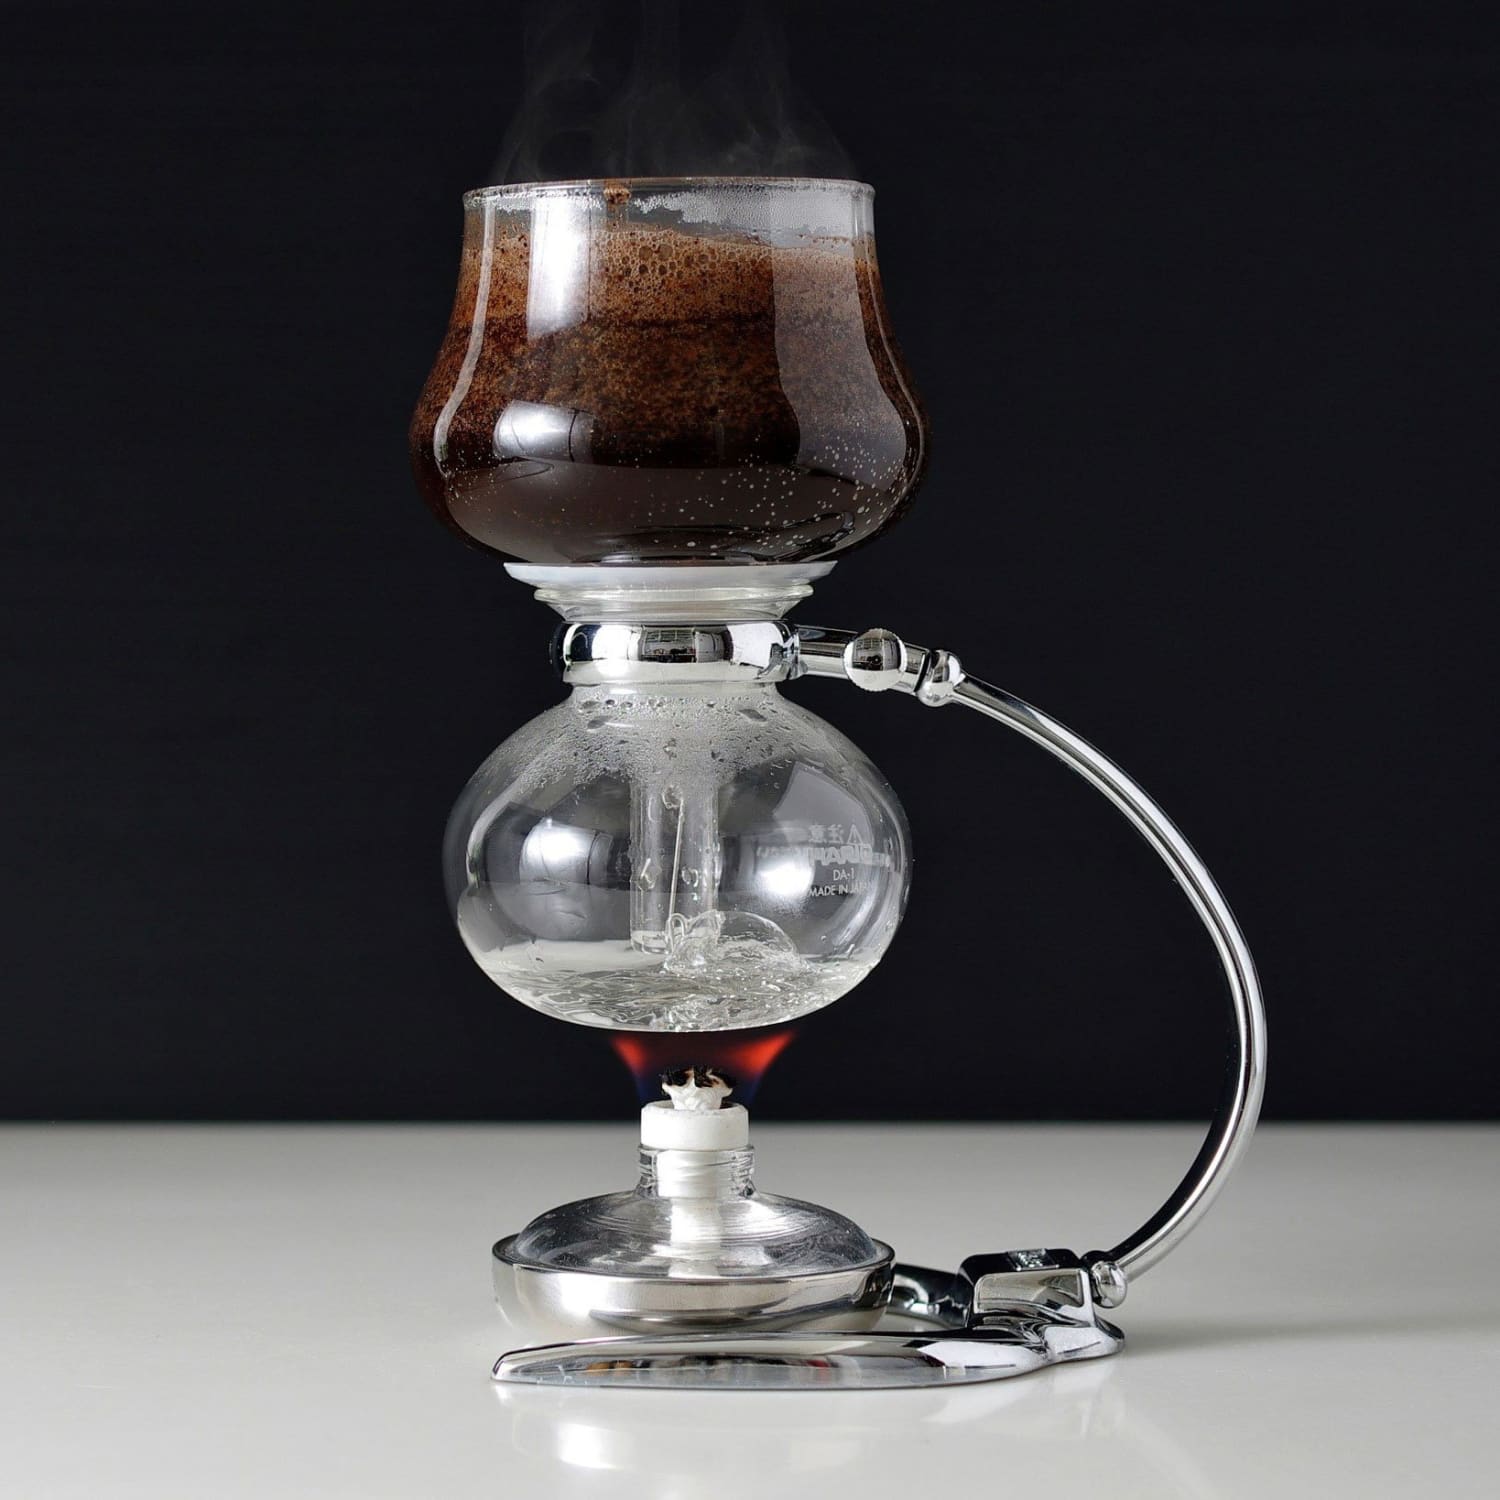 RobertsonCafes - The Siphon coffee maker was invented by Loeff of